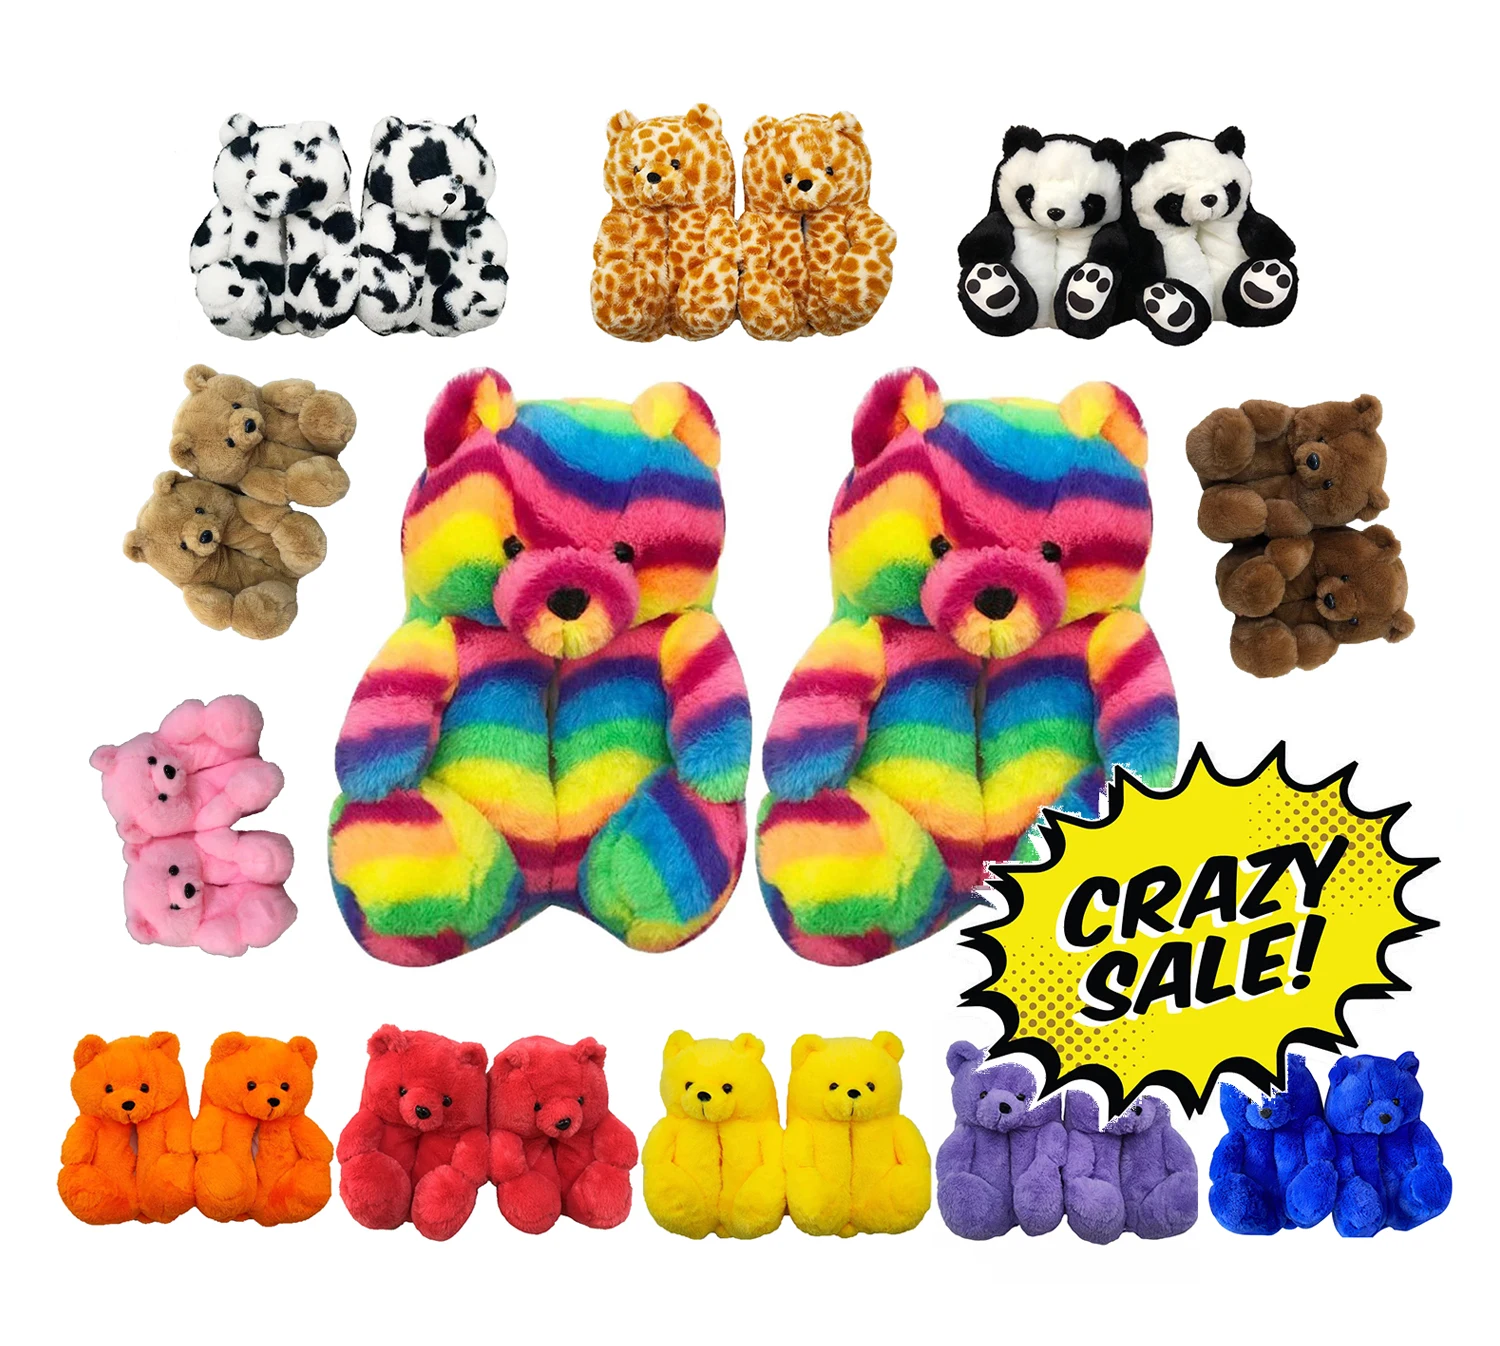 

Cute family indoor fashion fur slippers 2021 rainbow fluffy home slippers house mommy and me teddy bear slippers with free size